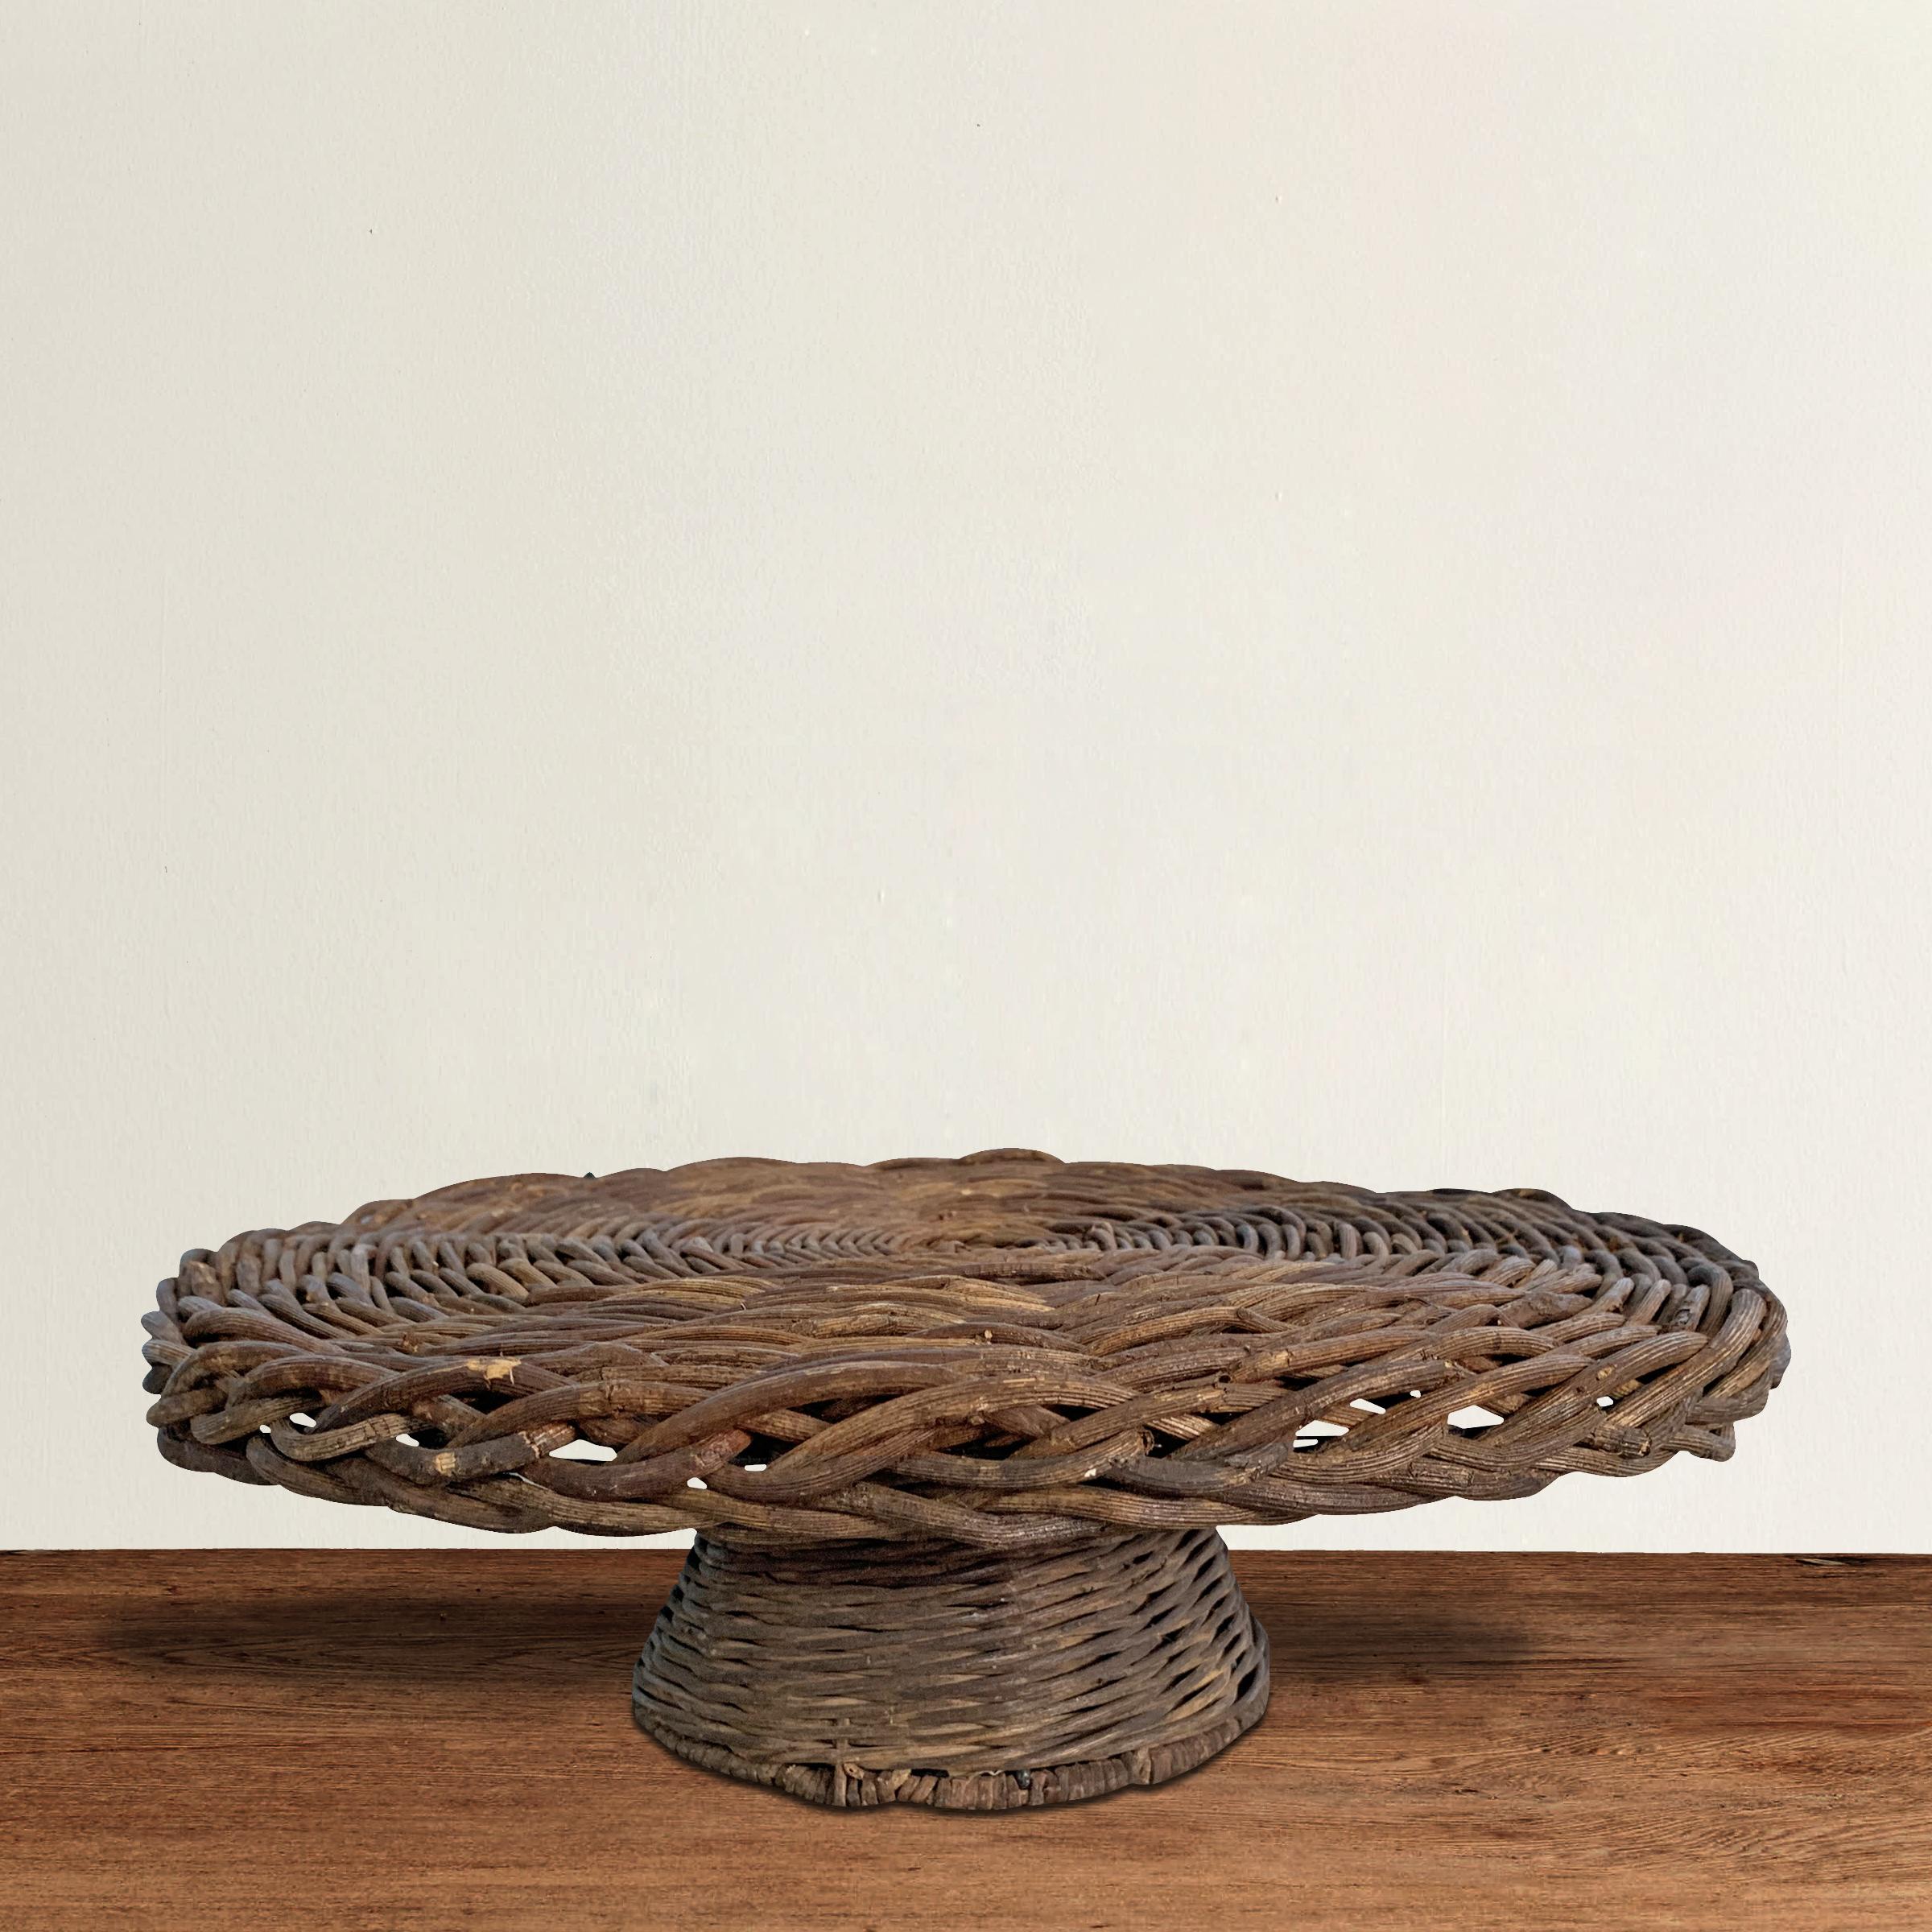 A charming 21st century American woven wicker cake stand waiting for your next confectionary treat.